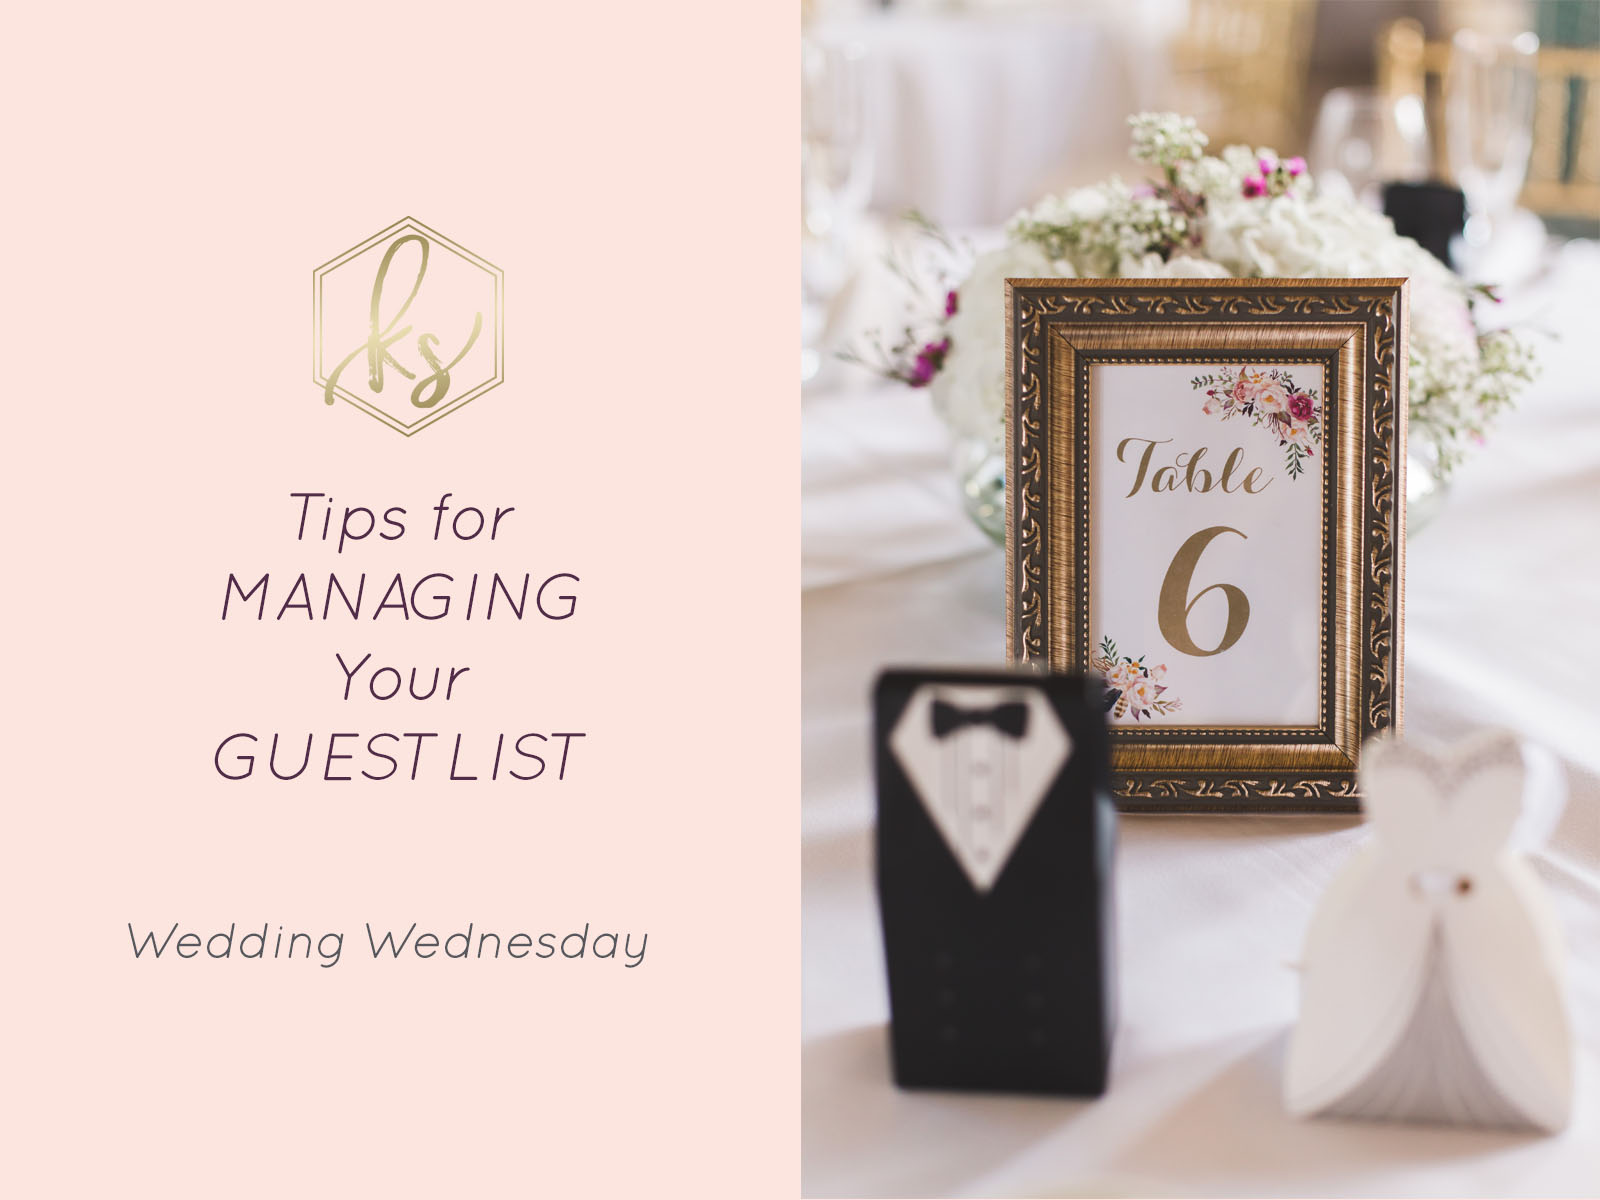 Tips for Managing Your Wedding Guest List